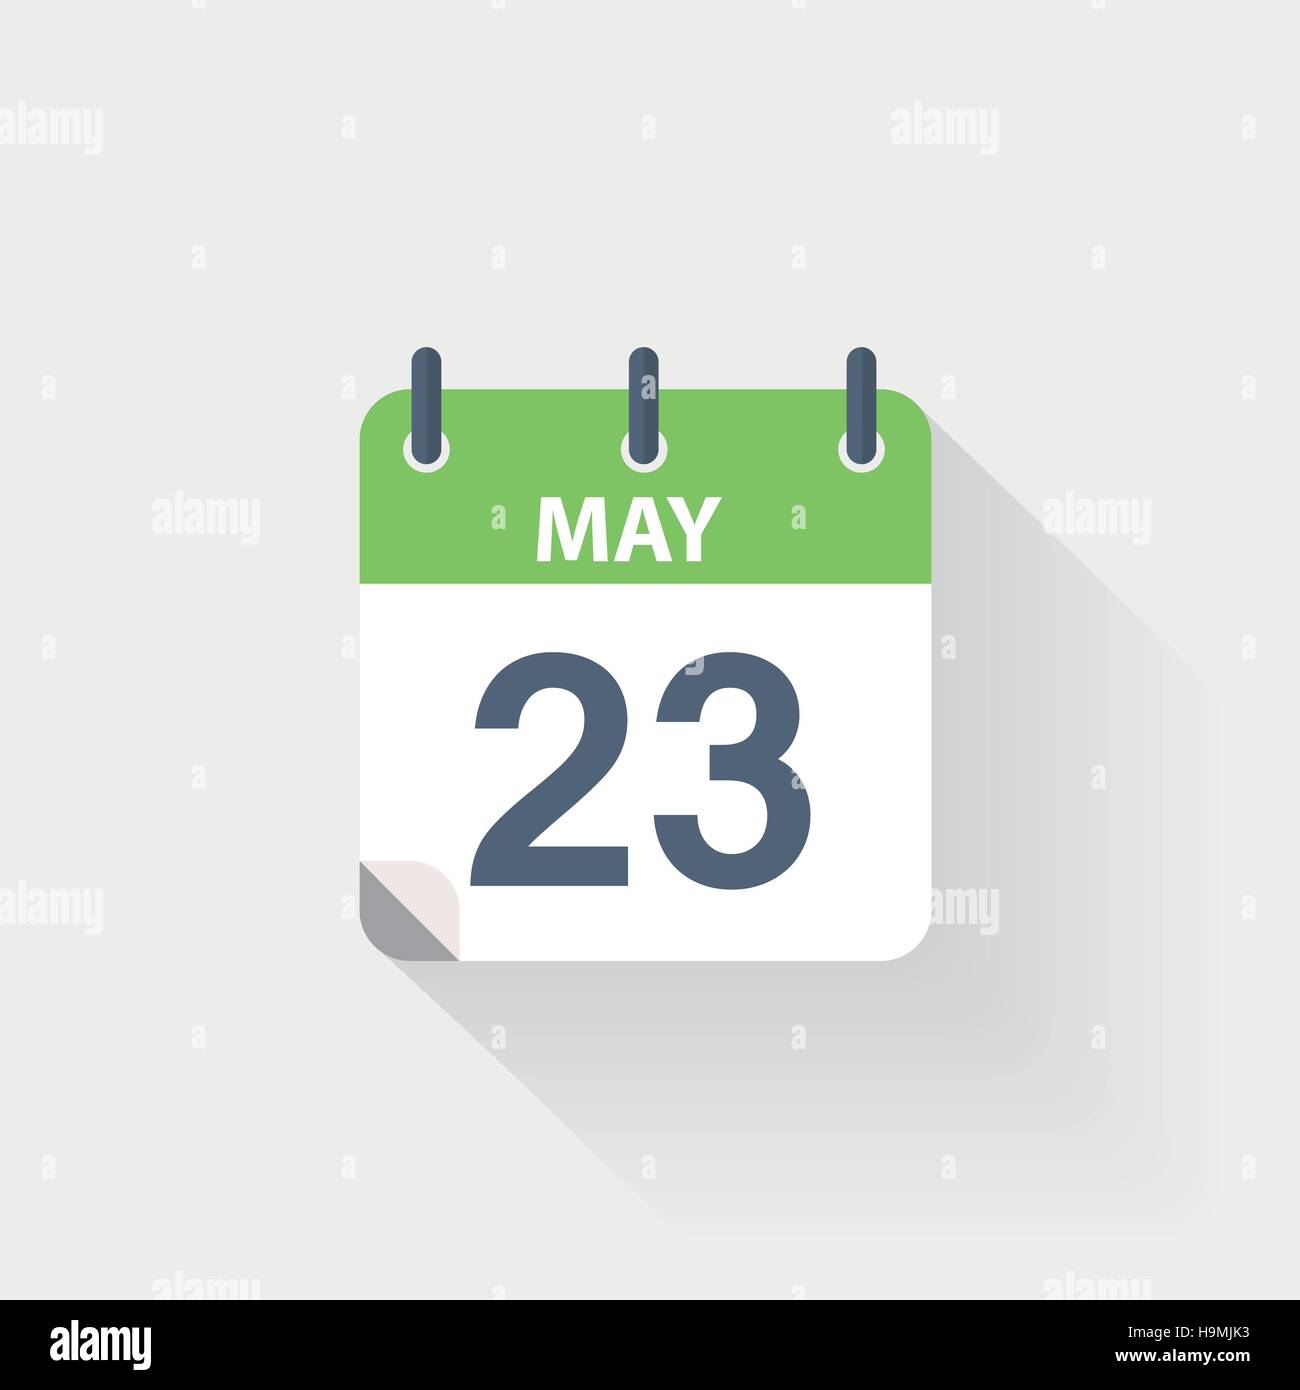 23 may calendar icon on grey background Stock Vector